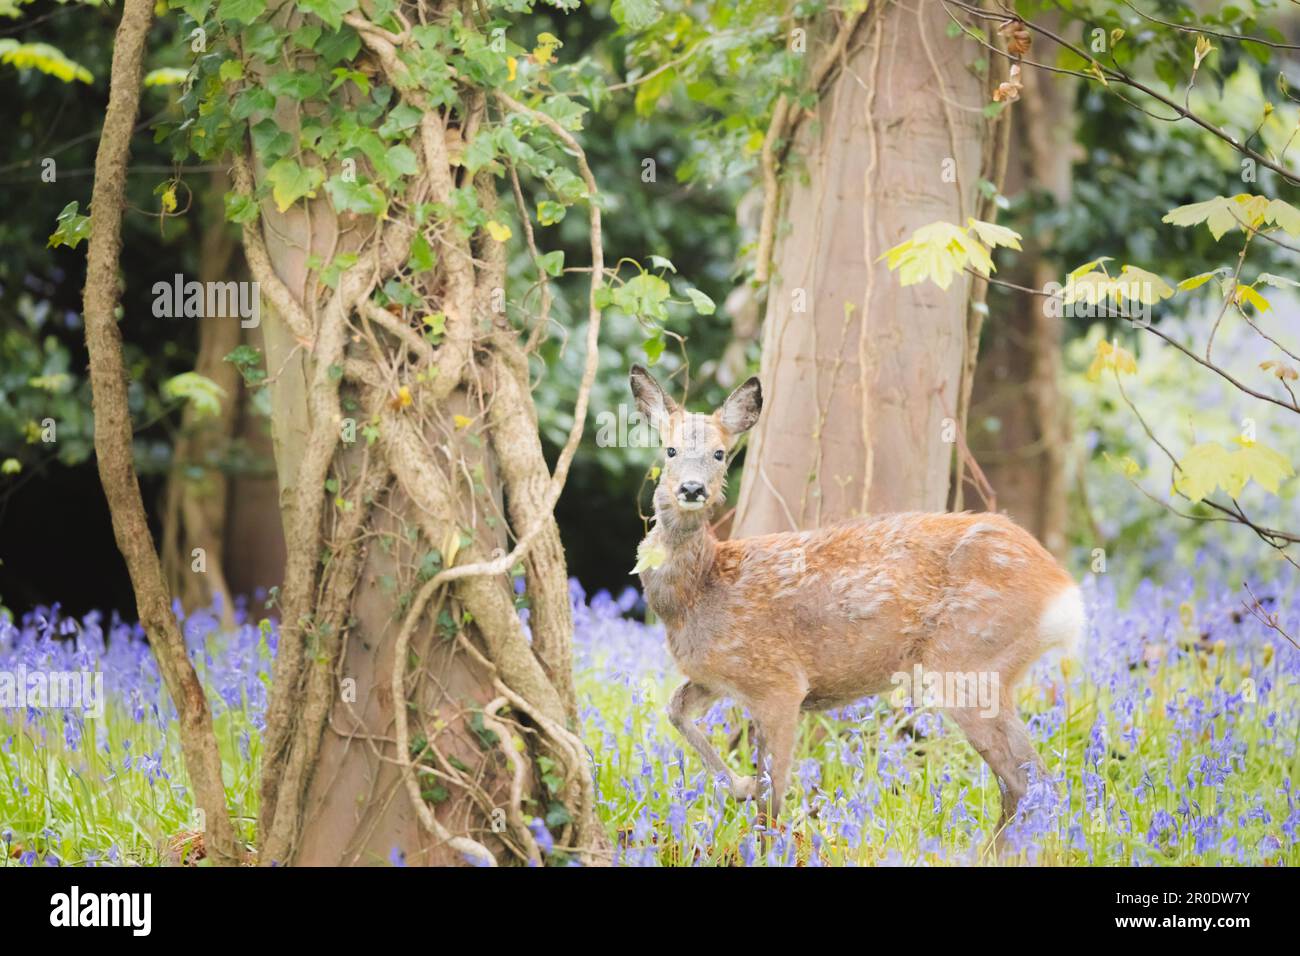 A young female Roe Deer (Capreolus capreolus) alert in a spring meadow of bluebell wildflowers at Dalgety Bay, Fife, Scotland, UK. Stock Photo